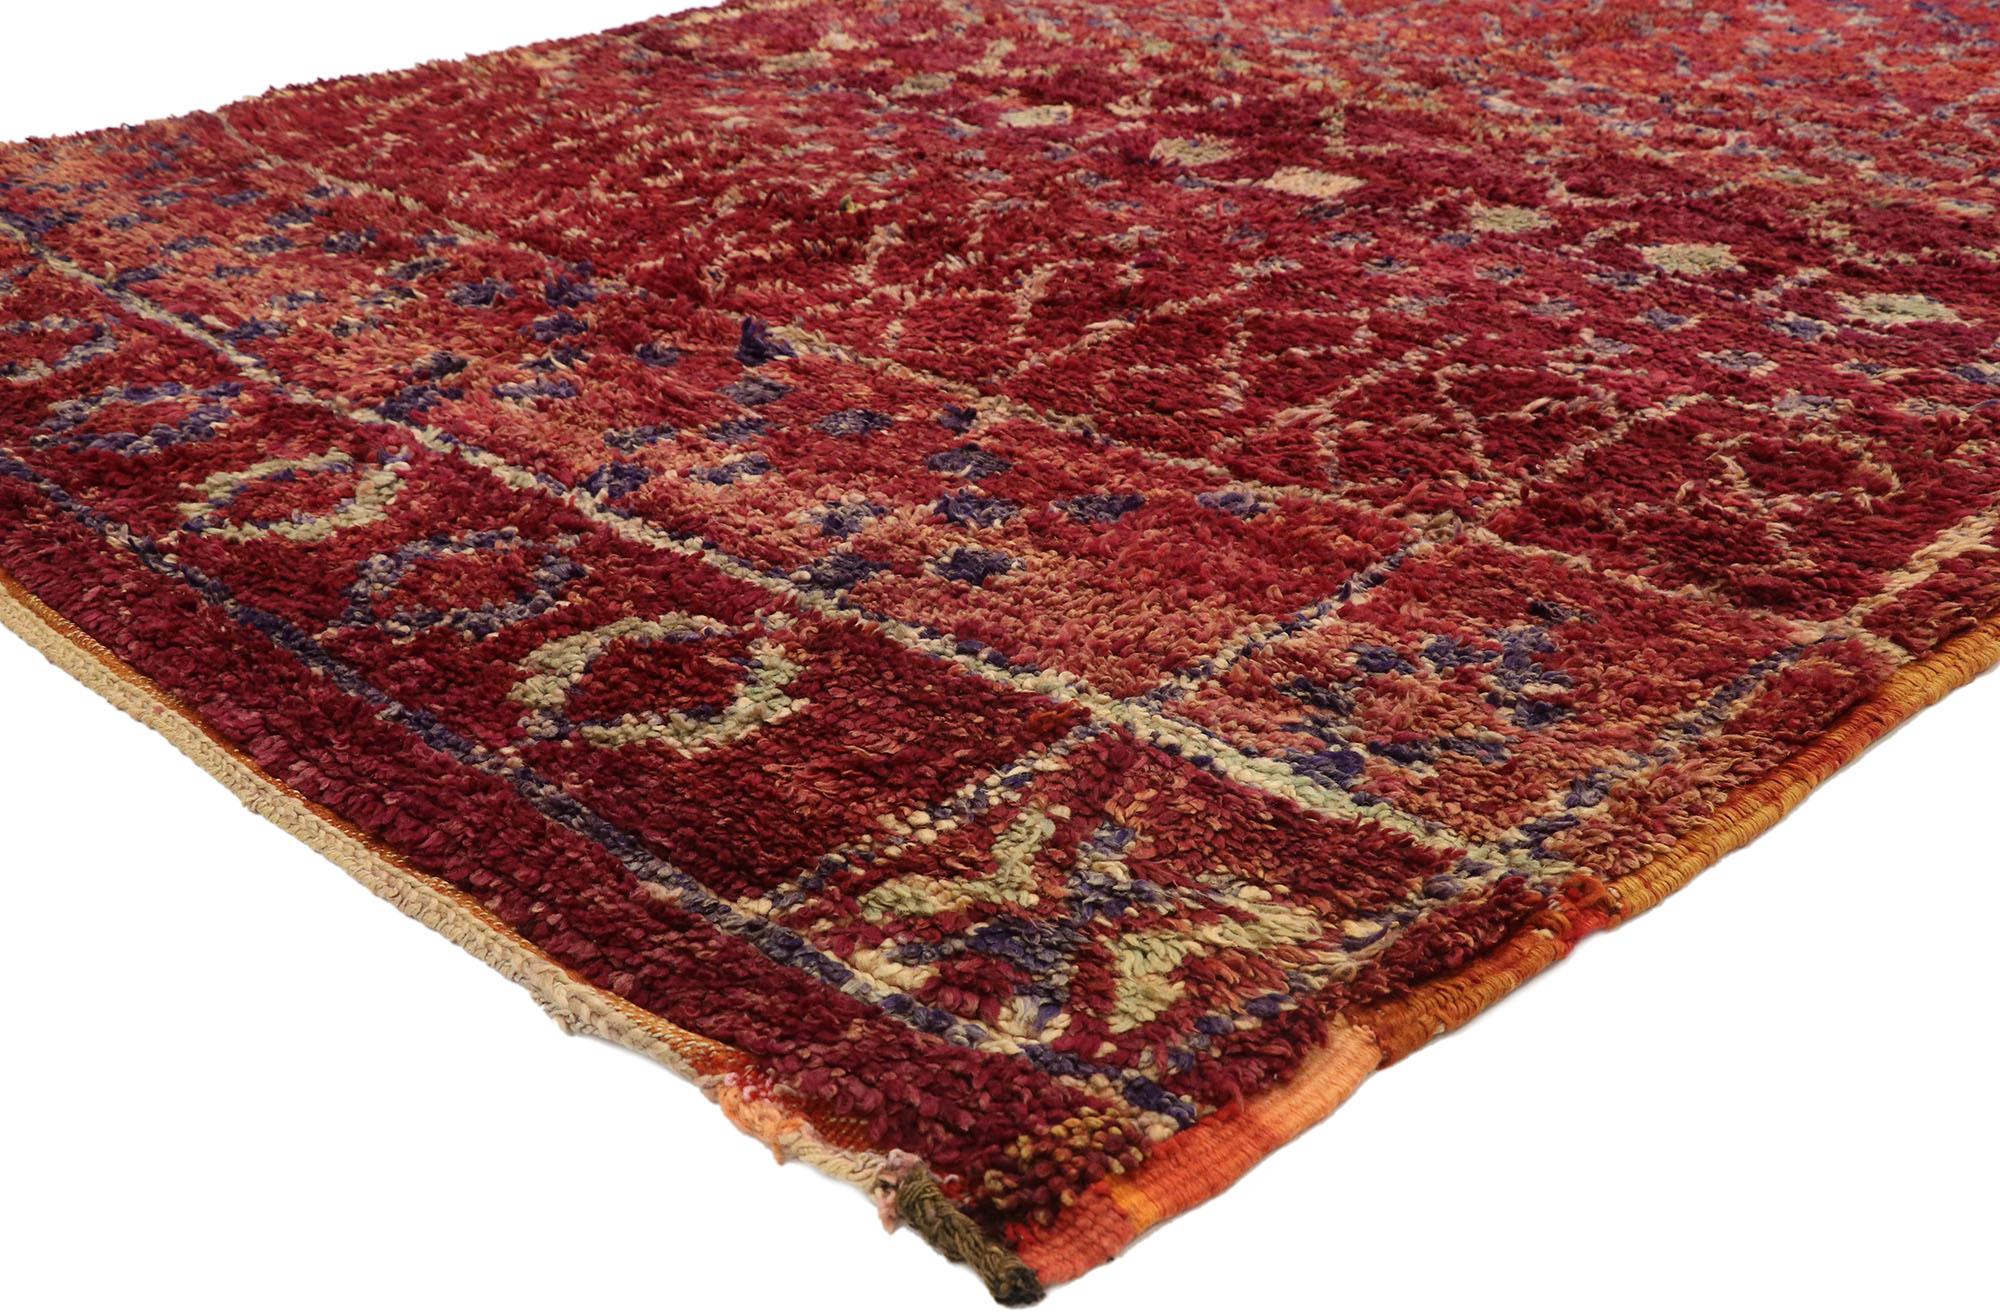 21051, vintage Berber Moroccan rug with Postmodern boho chic and Memphis Style 06'11 x 10'00. This hand-knotted wool vintage Berber Moroccan rug features a compartmental design spread across an abrashed berry and burgundy colored field. A variety of